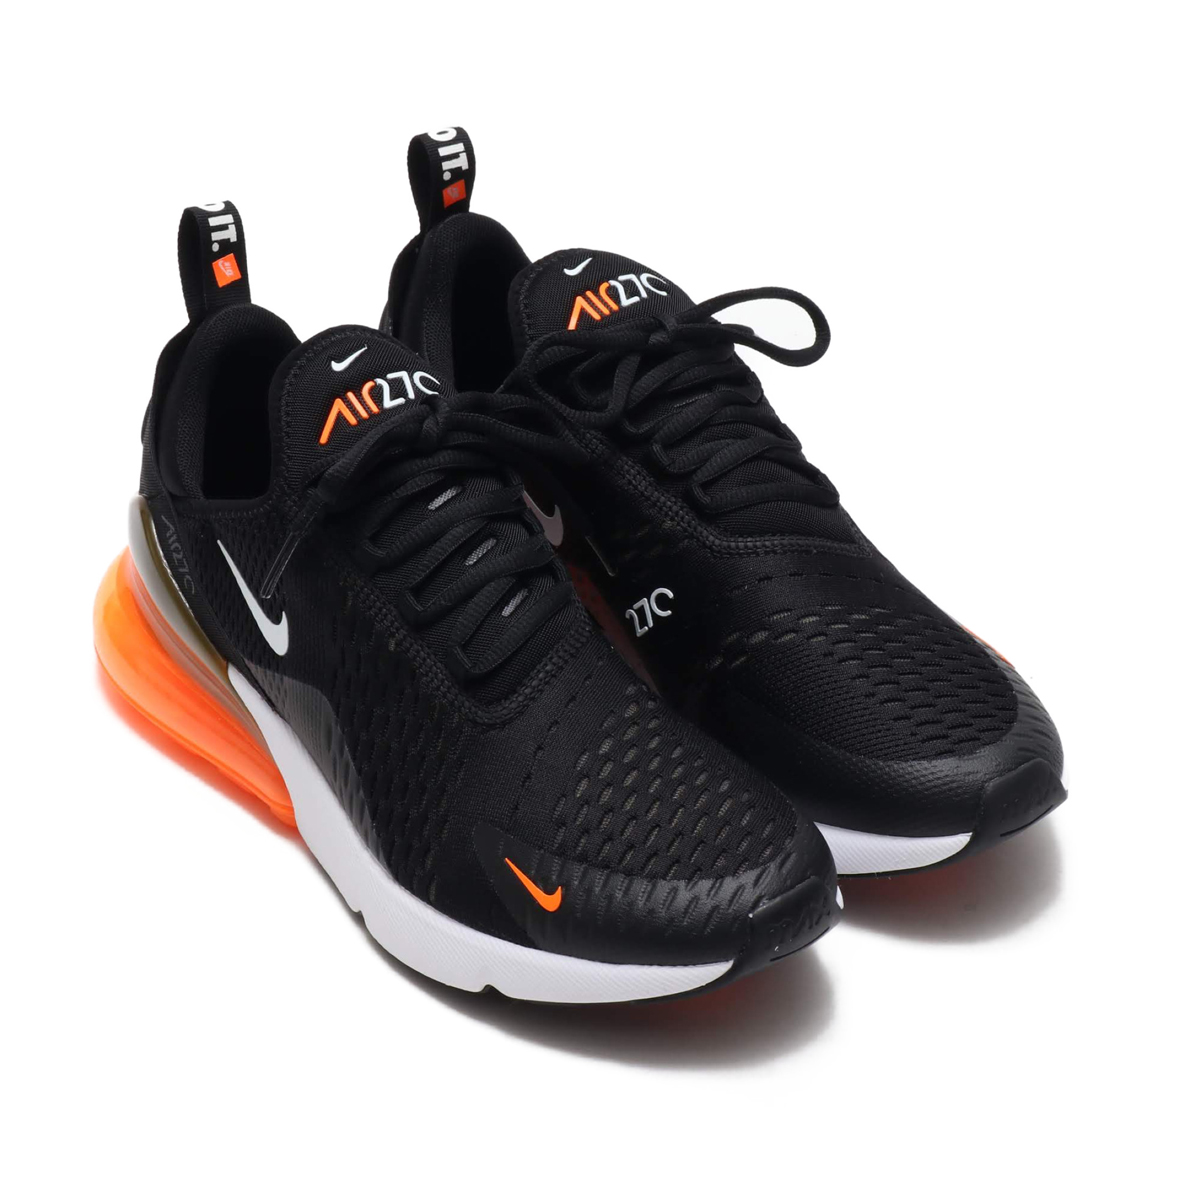 AIR MAX 270 JUST DO IT